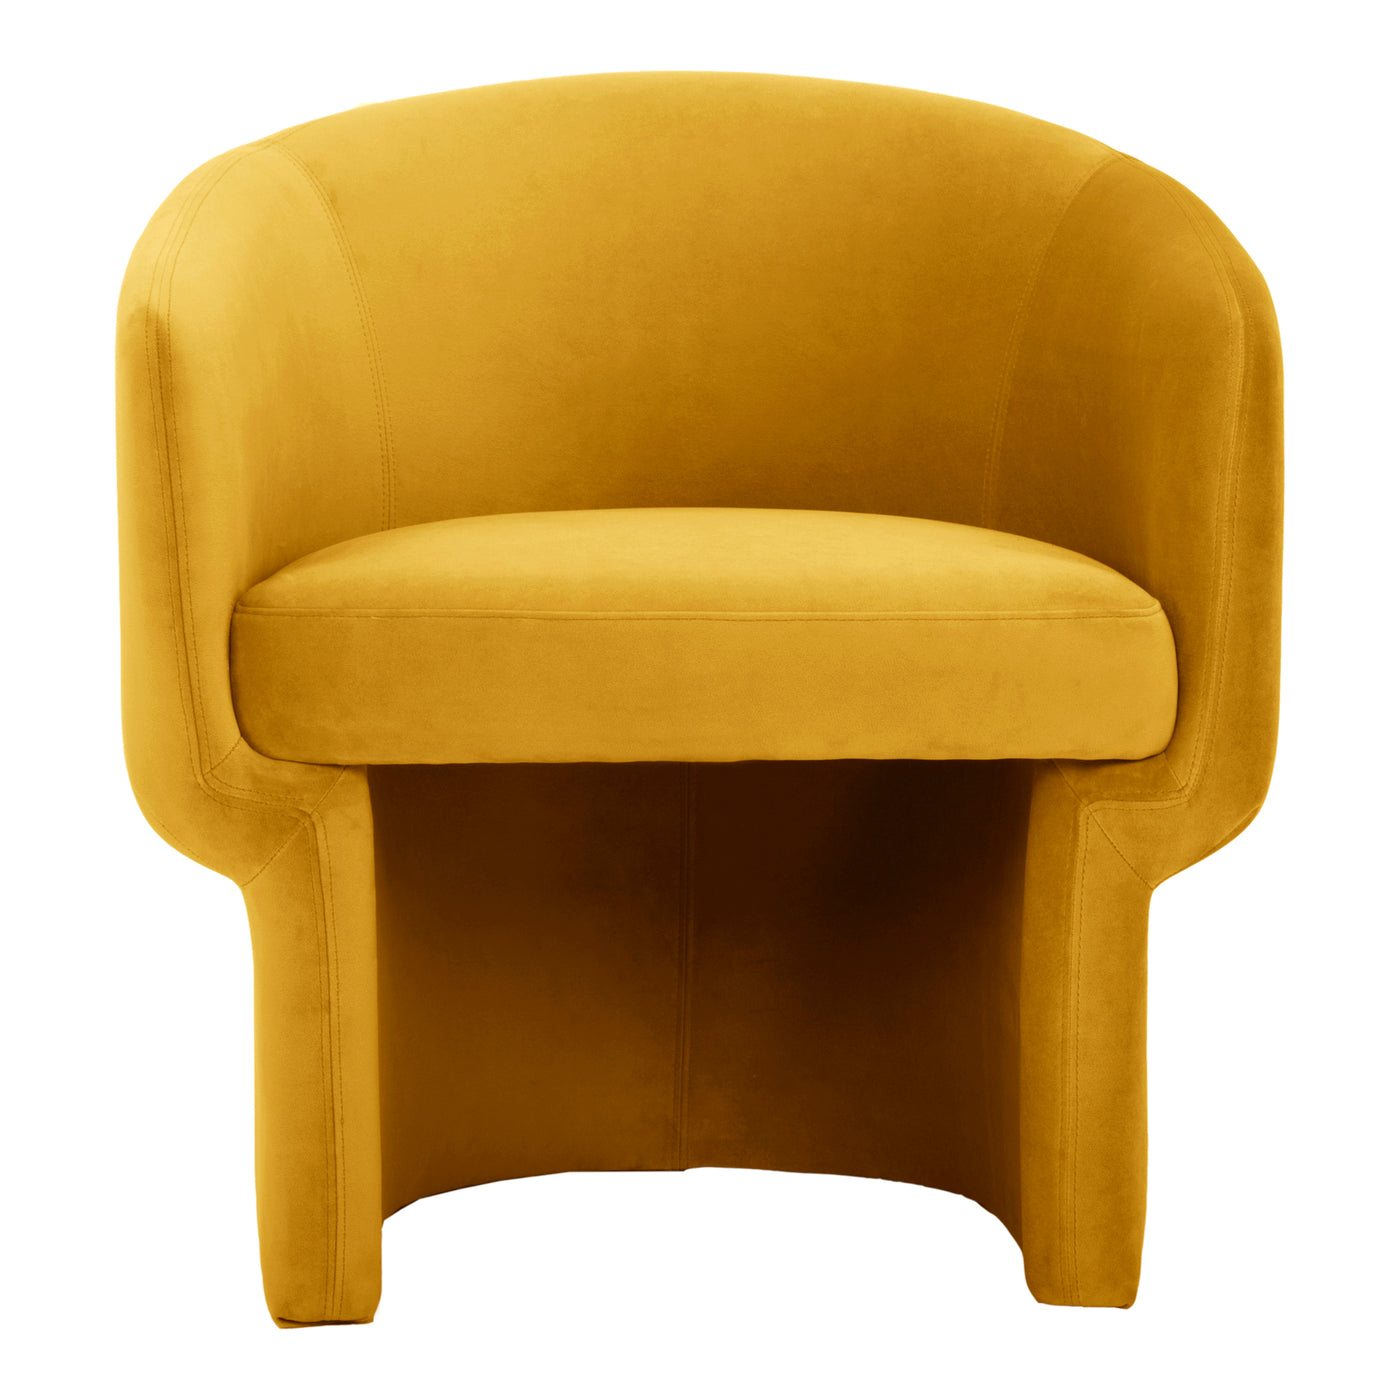 Not your typical velvety seat. The Franco occasional chair features a uniquely curved design for you to tuck right into. A...